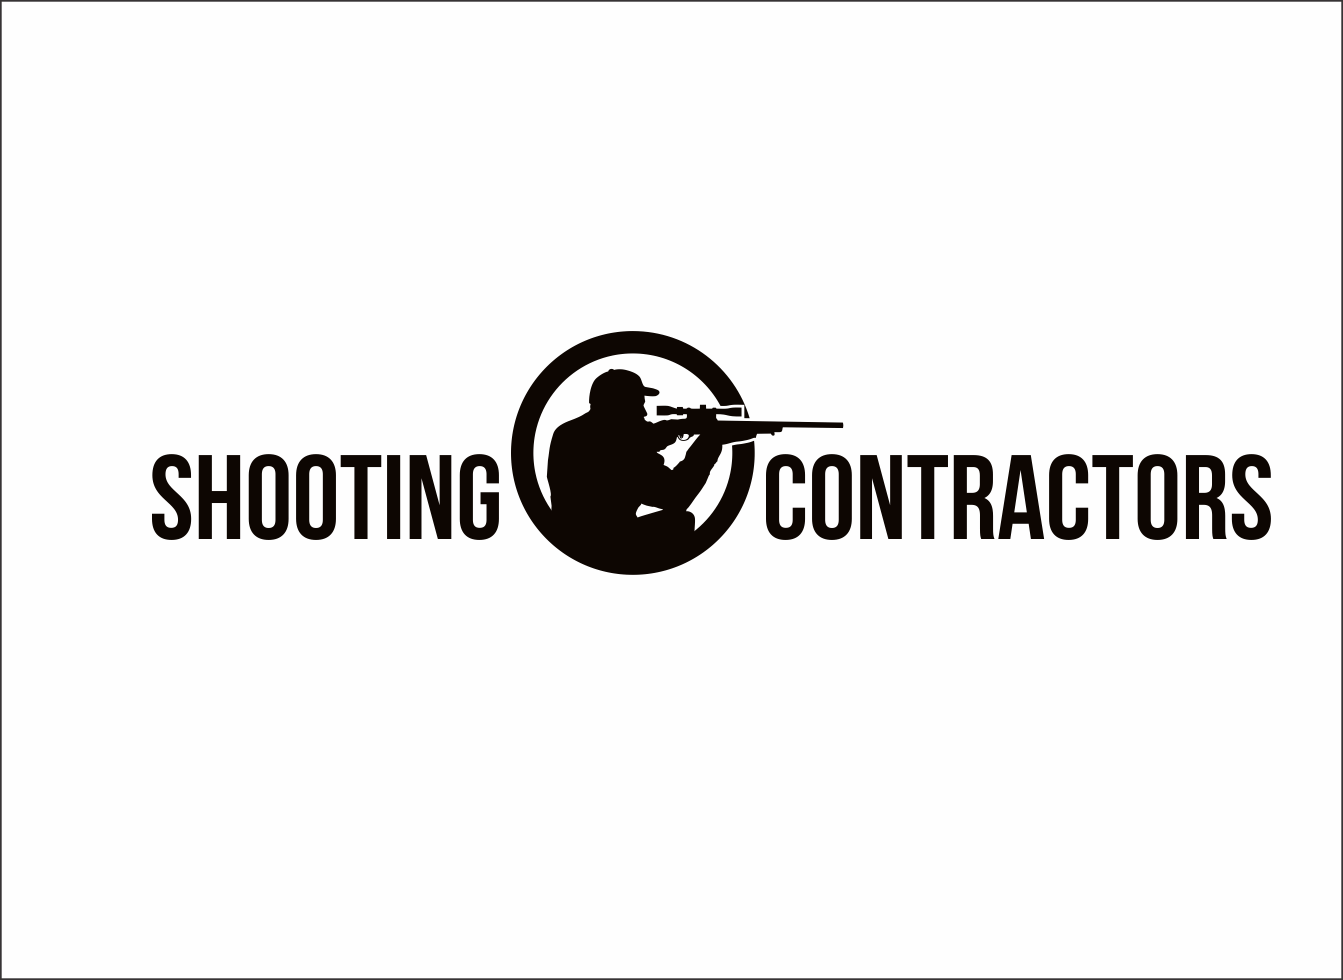 Shooting Logo - Business Logo Design for Shooting Contractors by SEOanalyst | Design ...